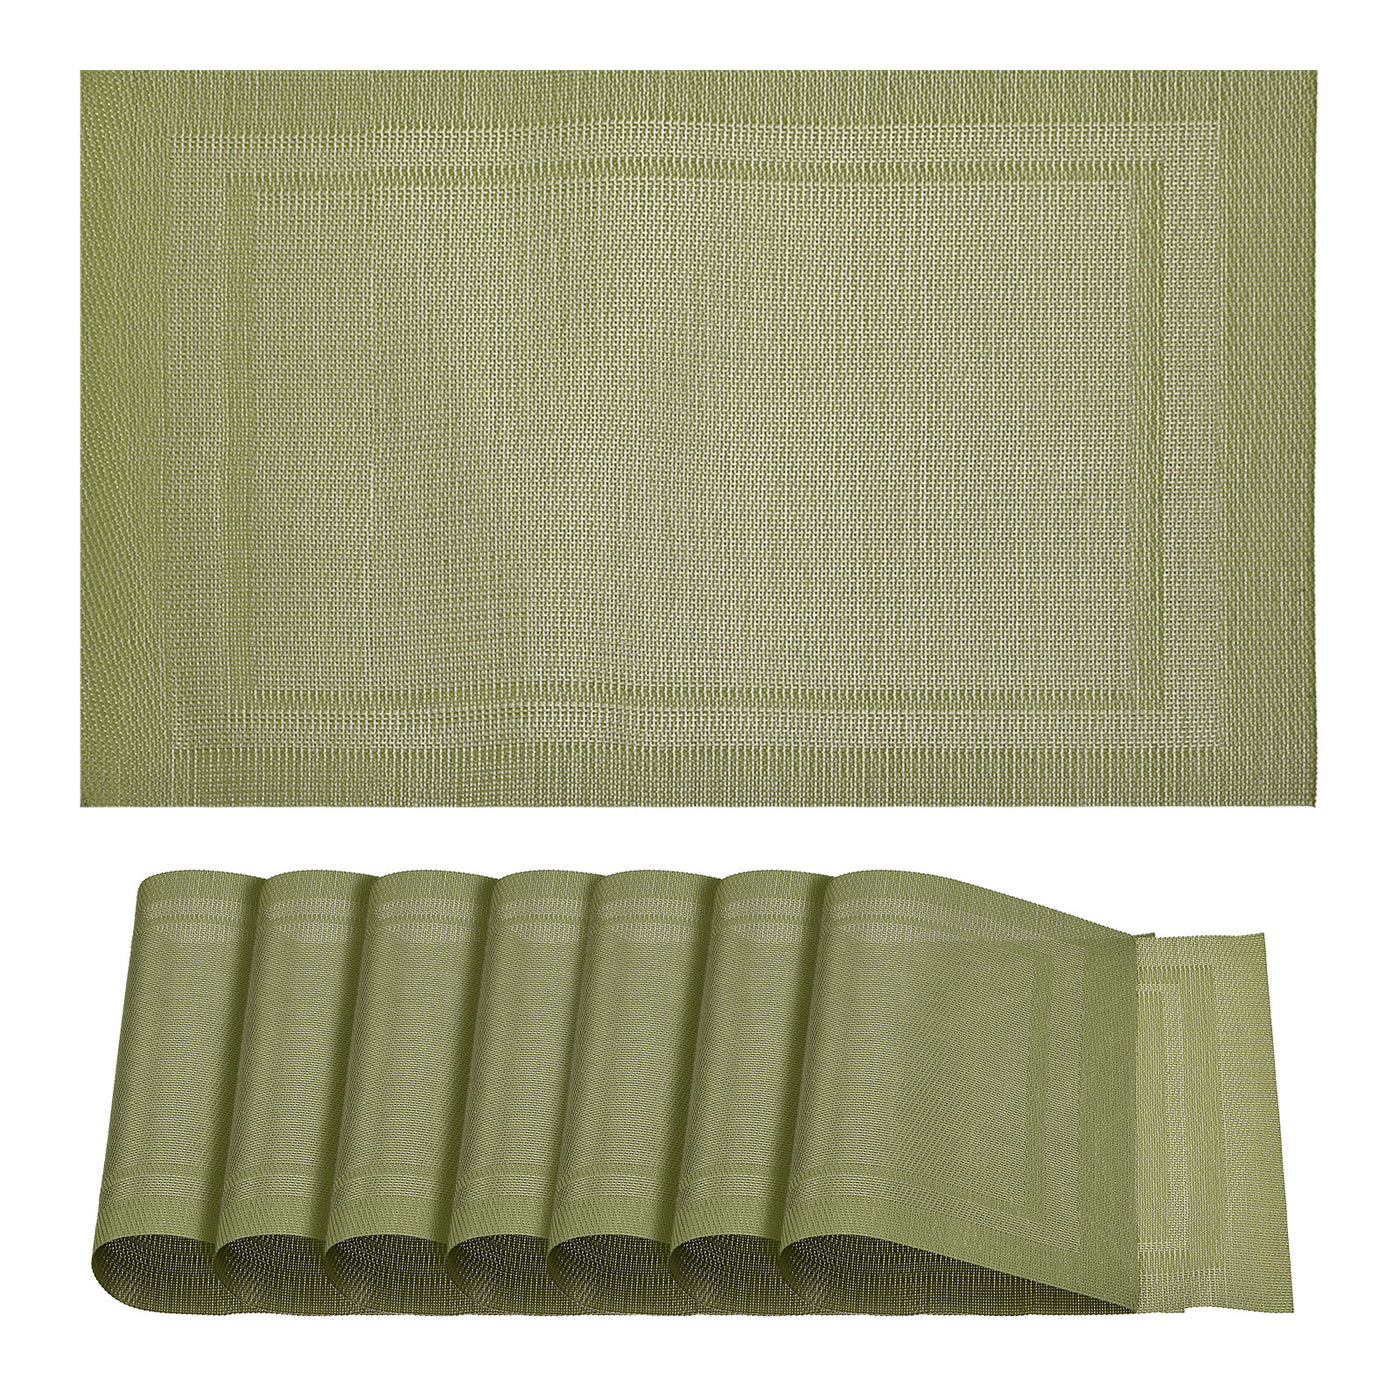 uxcell Uxcell Place Mats, 450x300mm Table Mats Set of 8 PVC Washable Woven Placemat Green